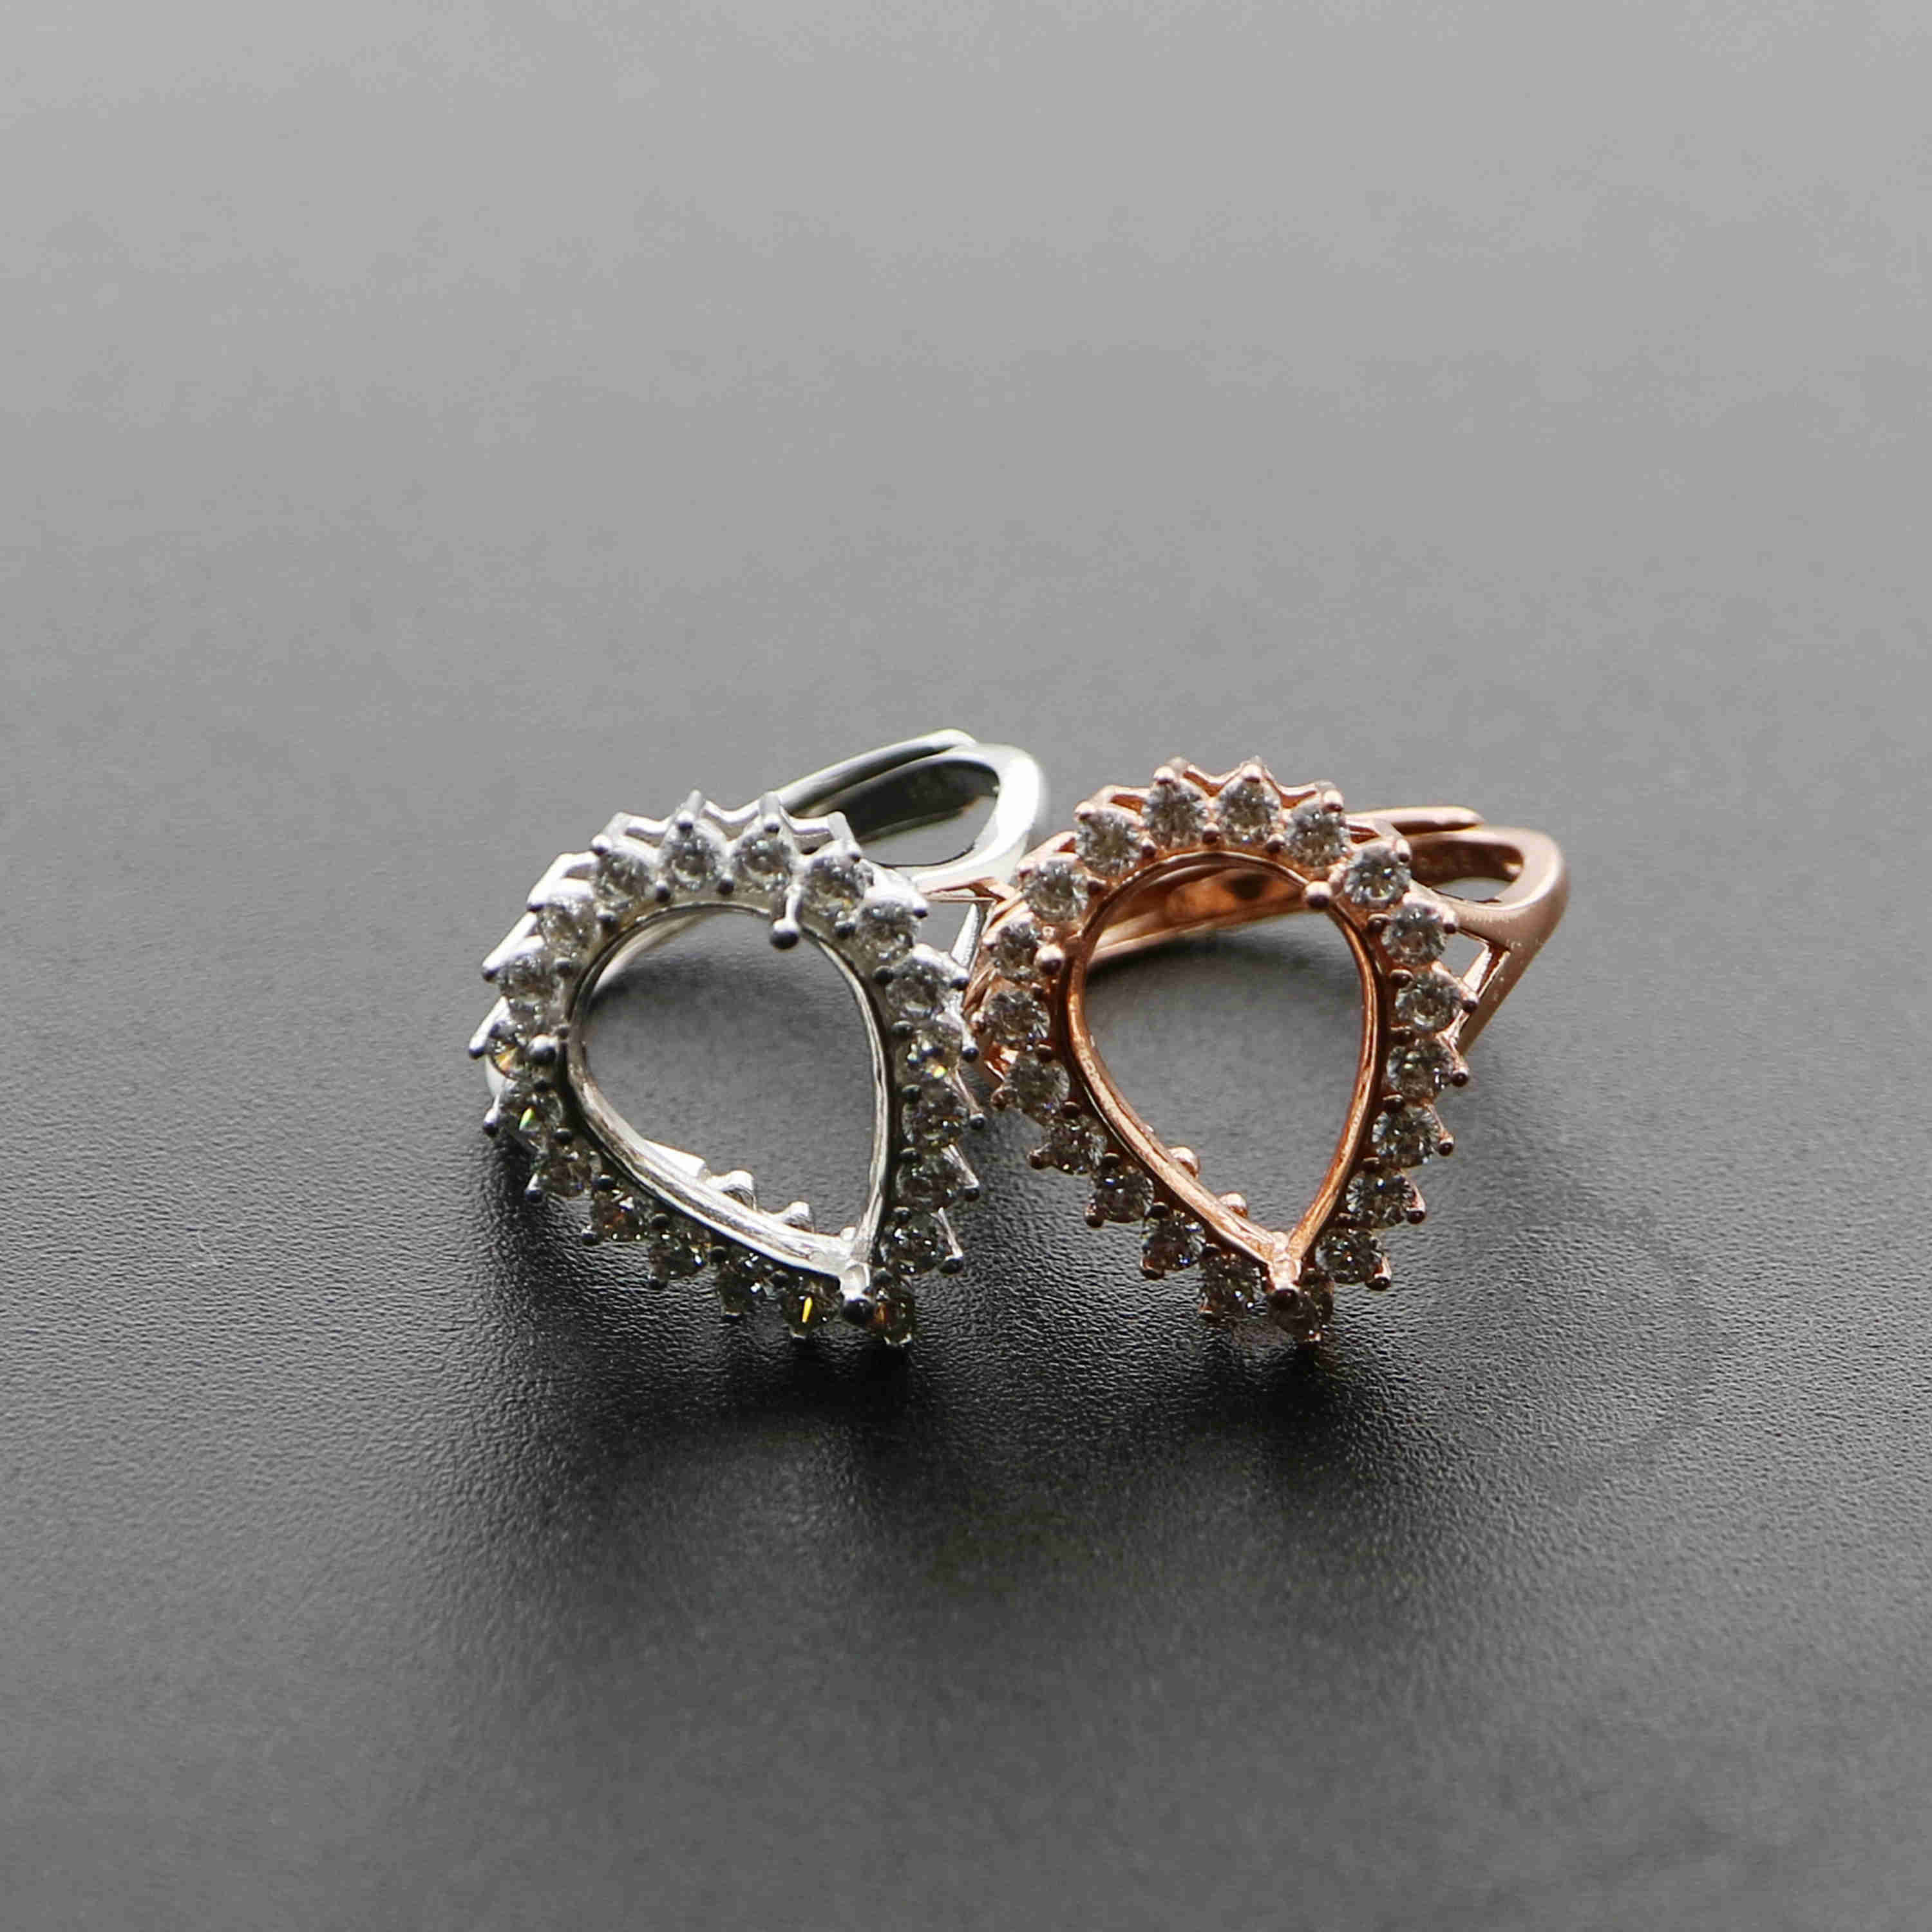 1Pcs Rose Gold Silver Tear Pear Drop Gems Cz Stone Prong Setting 925 Sterling Silver Bezel Tray DIY Adjustable Ring Settings 1294107 - Click Image to Close